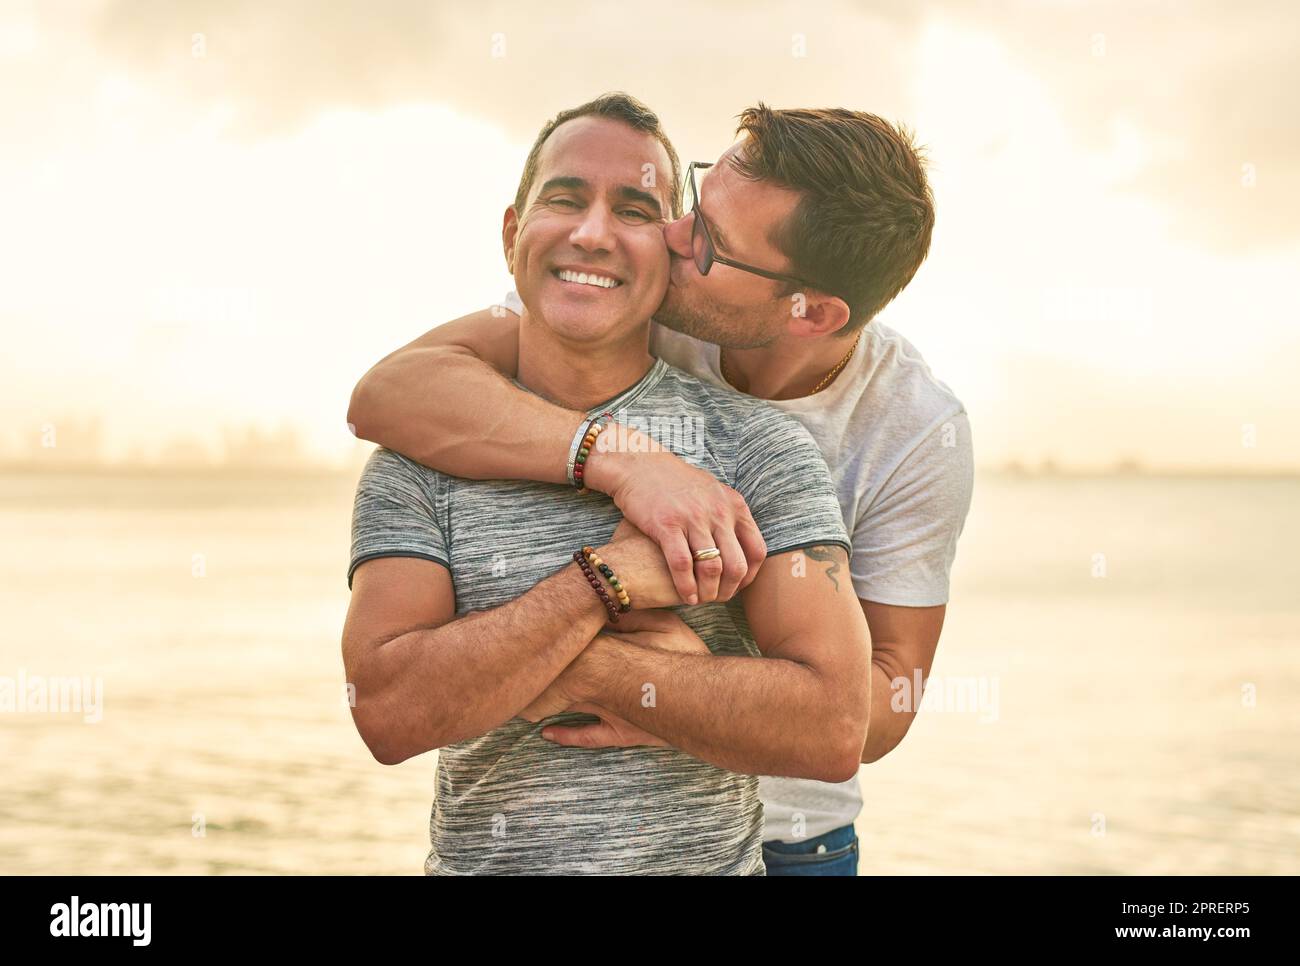 We show our love by being affectionate. an affectionate mature couple spending the day by the beach. Stock Photo